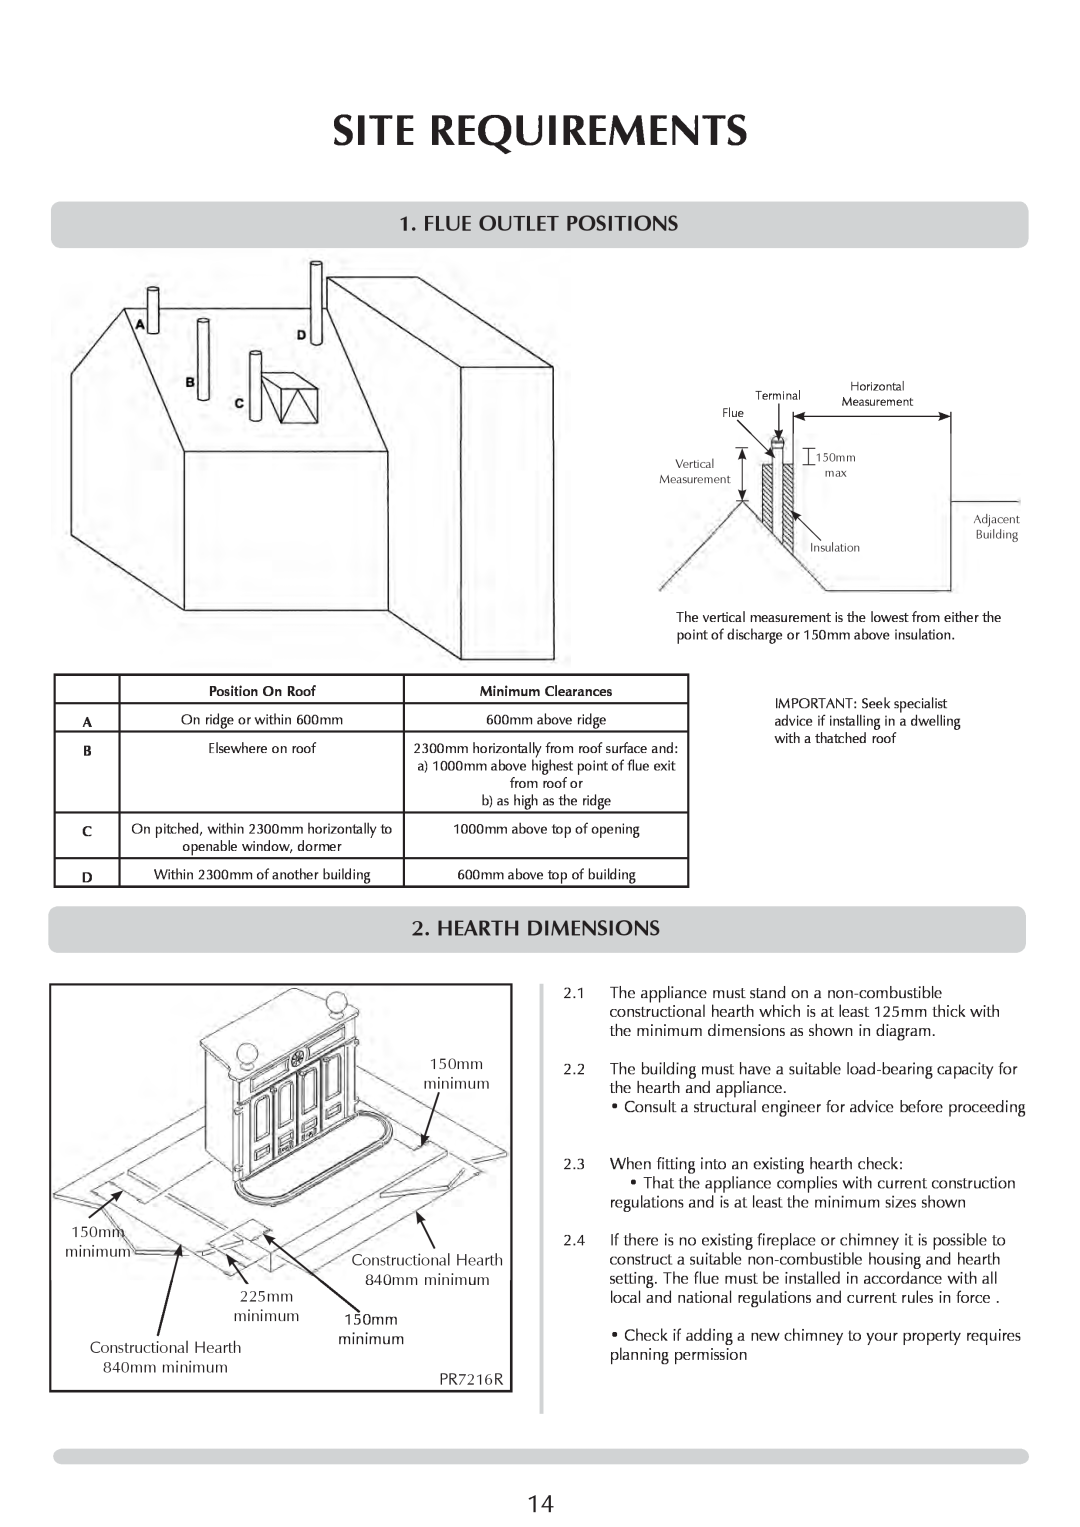 Stovax 1000, 1002, 1001 manual Flue Outlet Positions, Hearth Dimensions, Site Requirements 